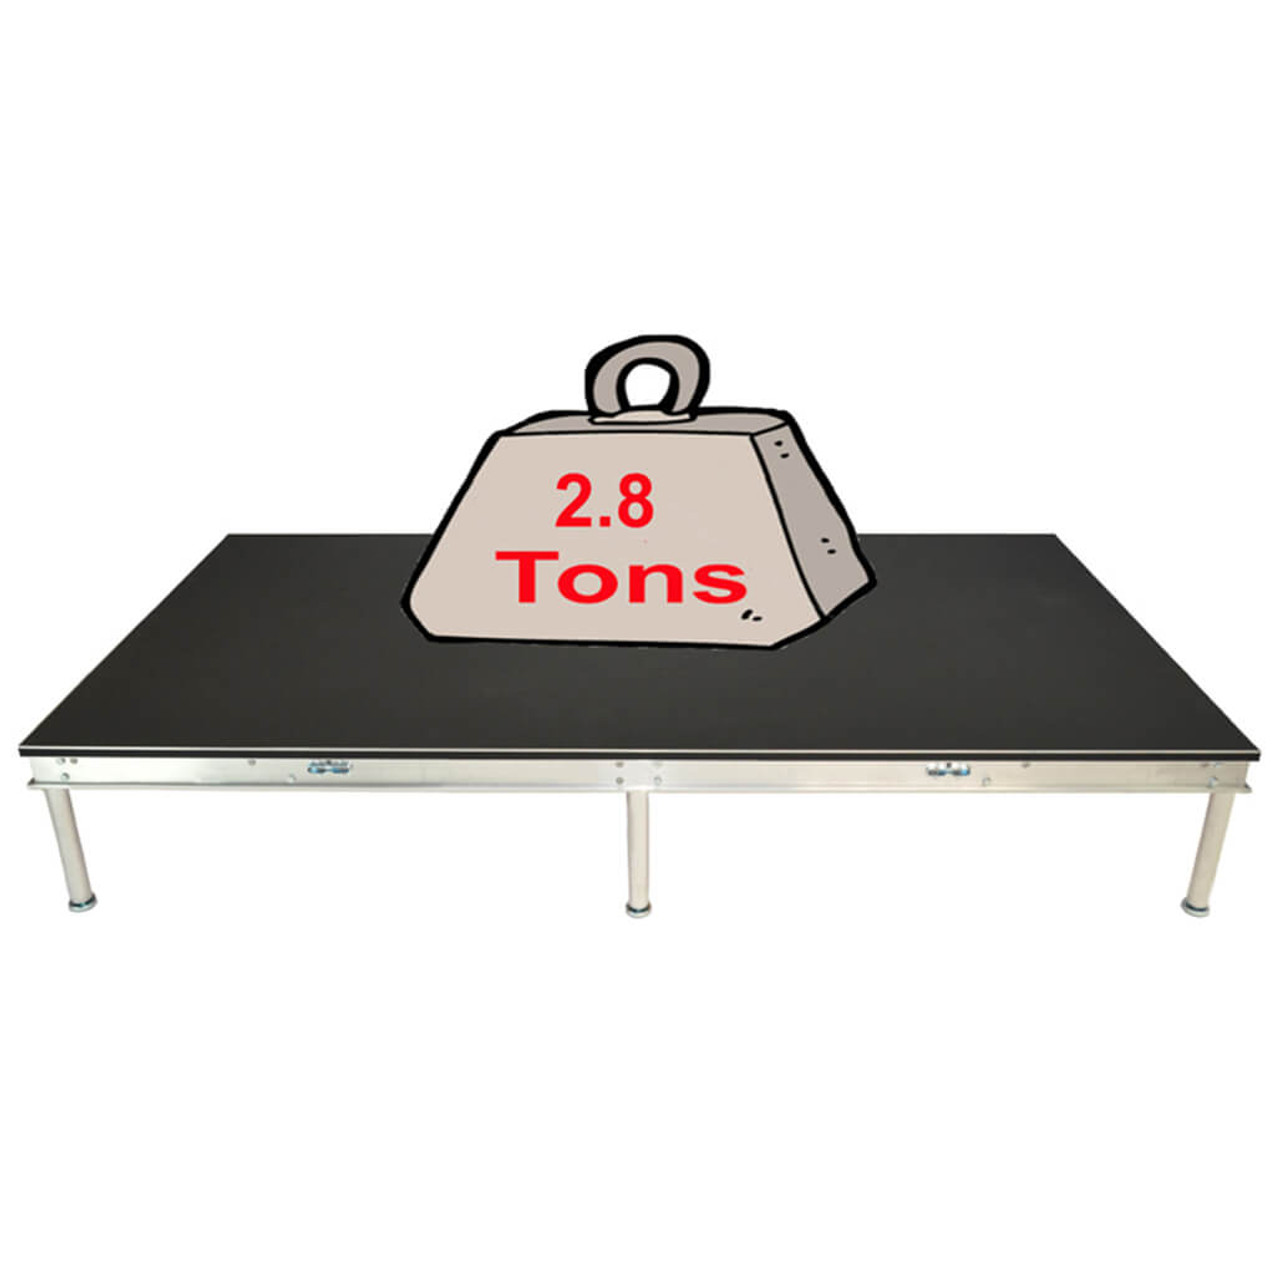 Top rated Quik Stage 8' x 40' High Portable Stage Package with Black Polyvinyl Non-Skid Surface. Additional Heights and Surfaces Available - Holds 2.8 tons per 4 x 8 when spread out evenly